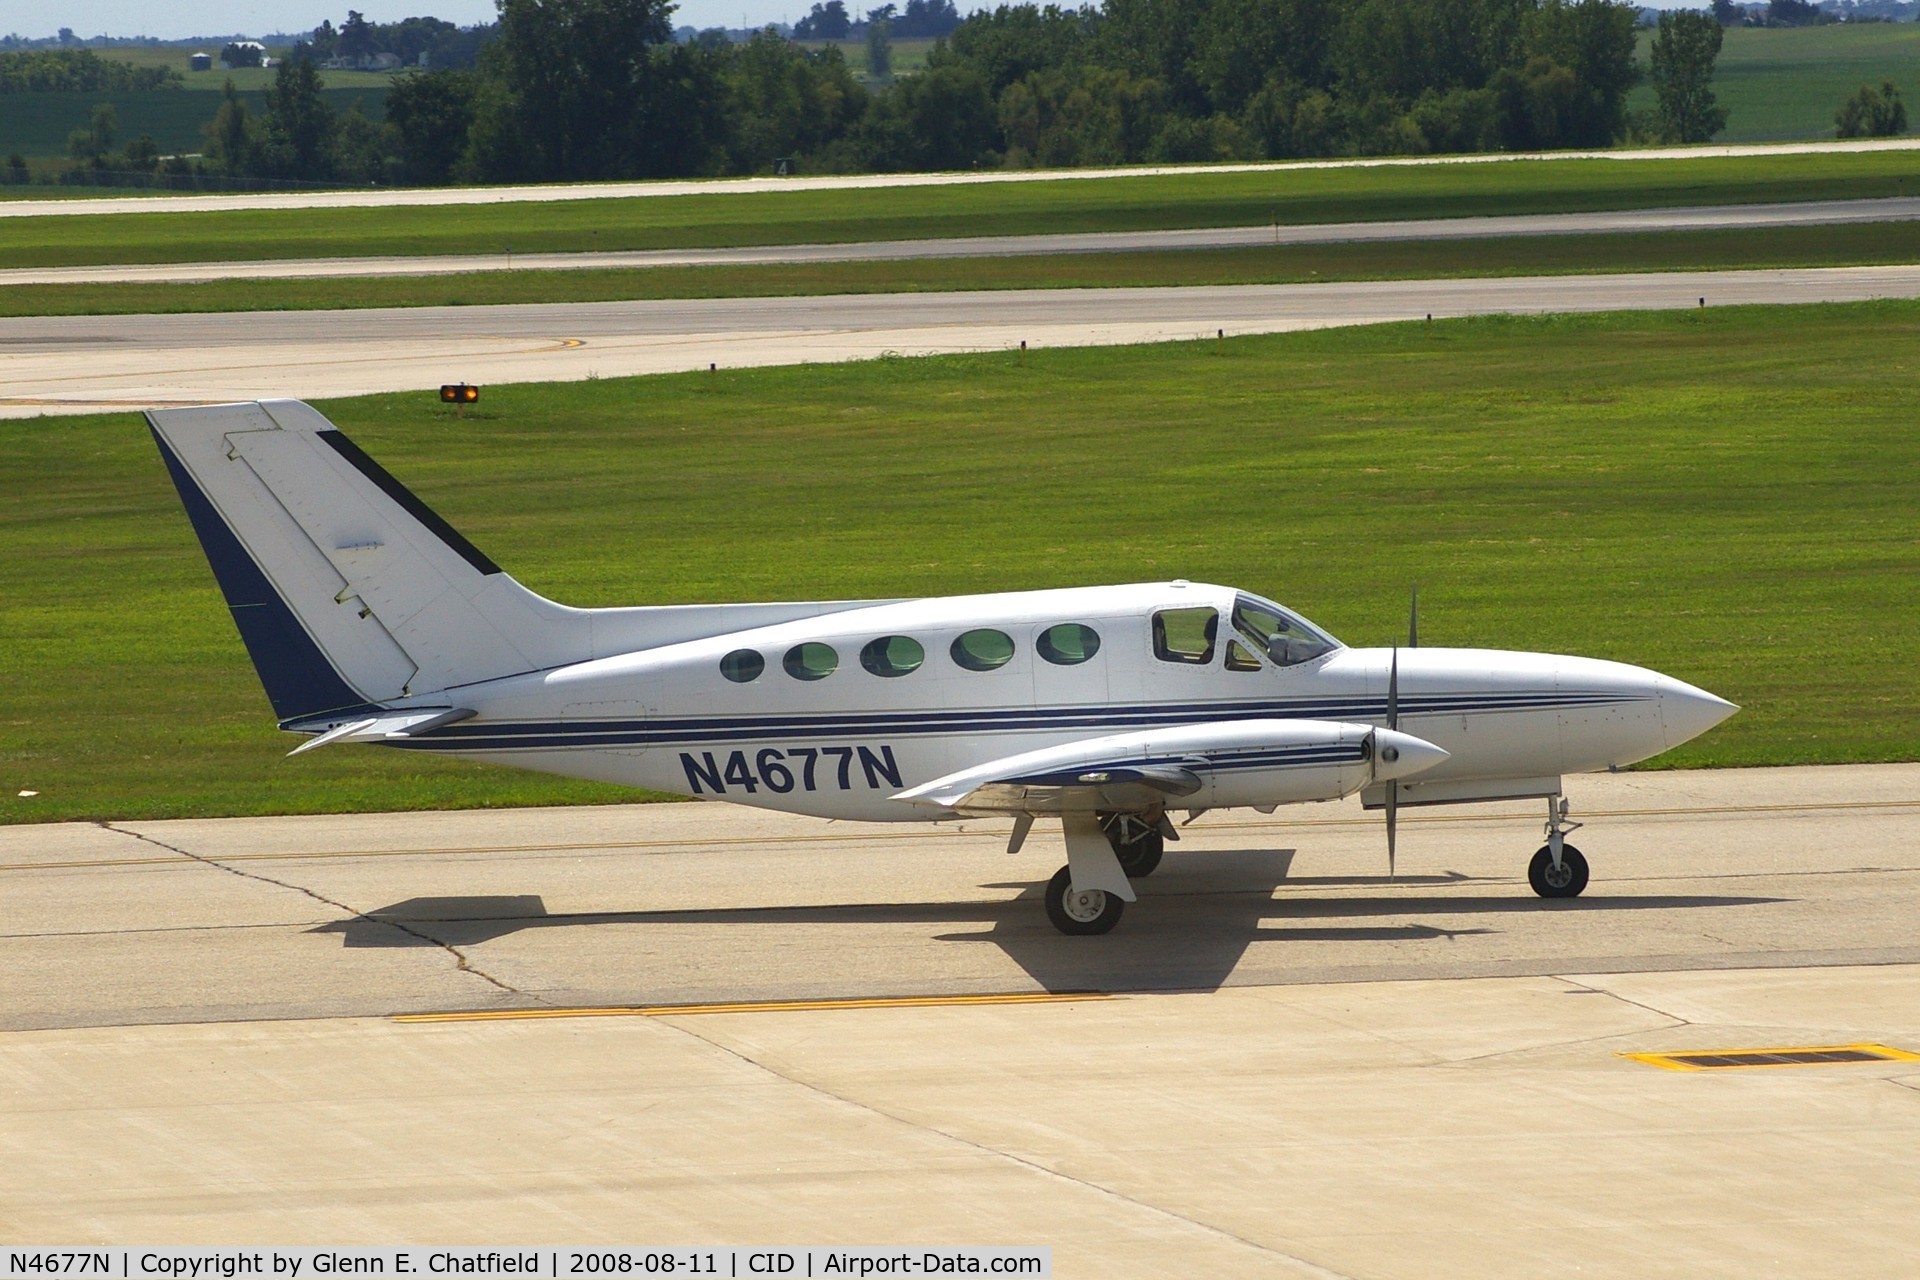 N4677N, 1978 Cessna 414A Chancellor C/N 414A0068, Taxiing to Landmark FBO, as seen from my office window.